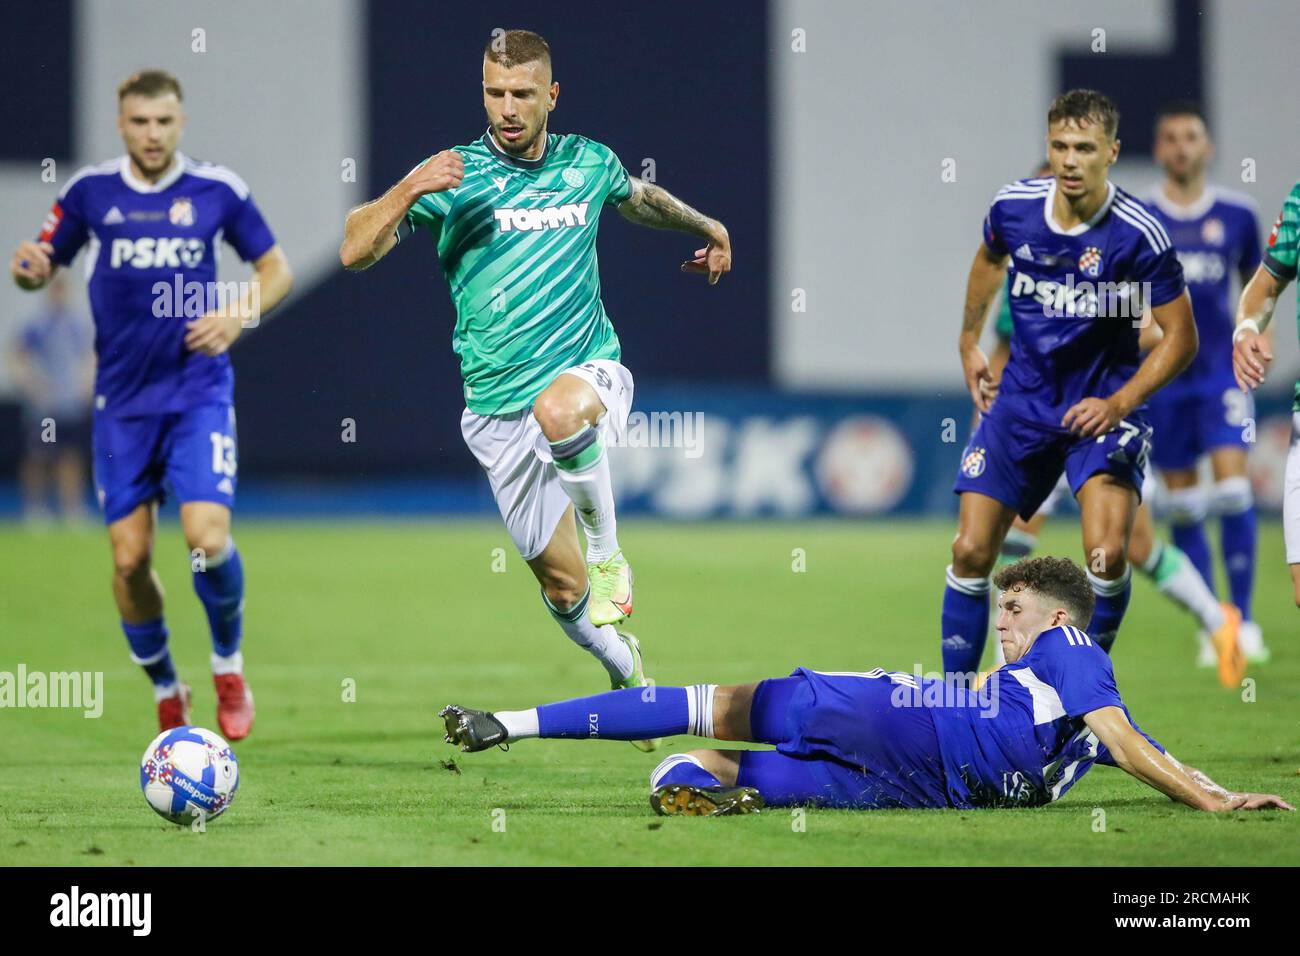 Zagreb, Croatia. 15th July, 2023. Jan Mlakar of Hajduk Split and Fran Topic  of Dinamo Zagreb in action during the Supersport Supercup match between GNK  Dinamo Zagreb and HNK Hajduk Split at Maksimir stadium on July 15, 2023, in  Zagreb, Croatia